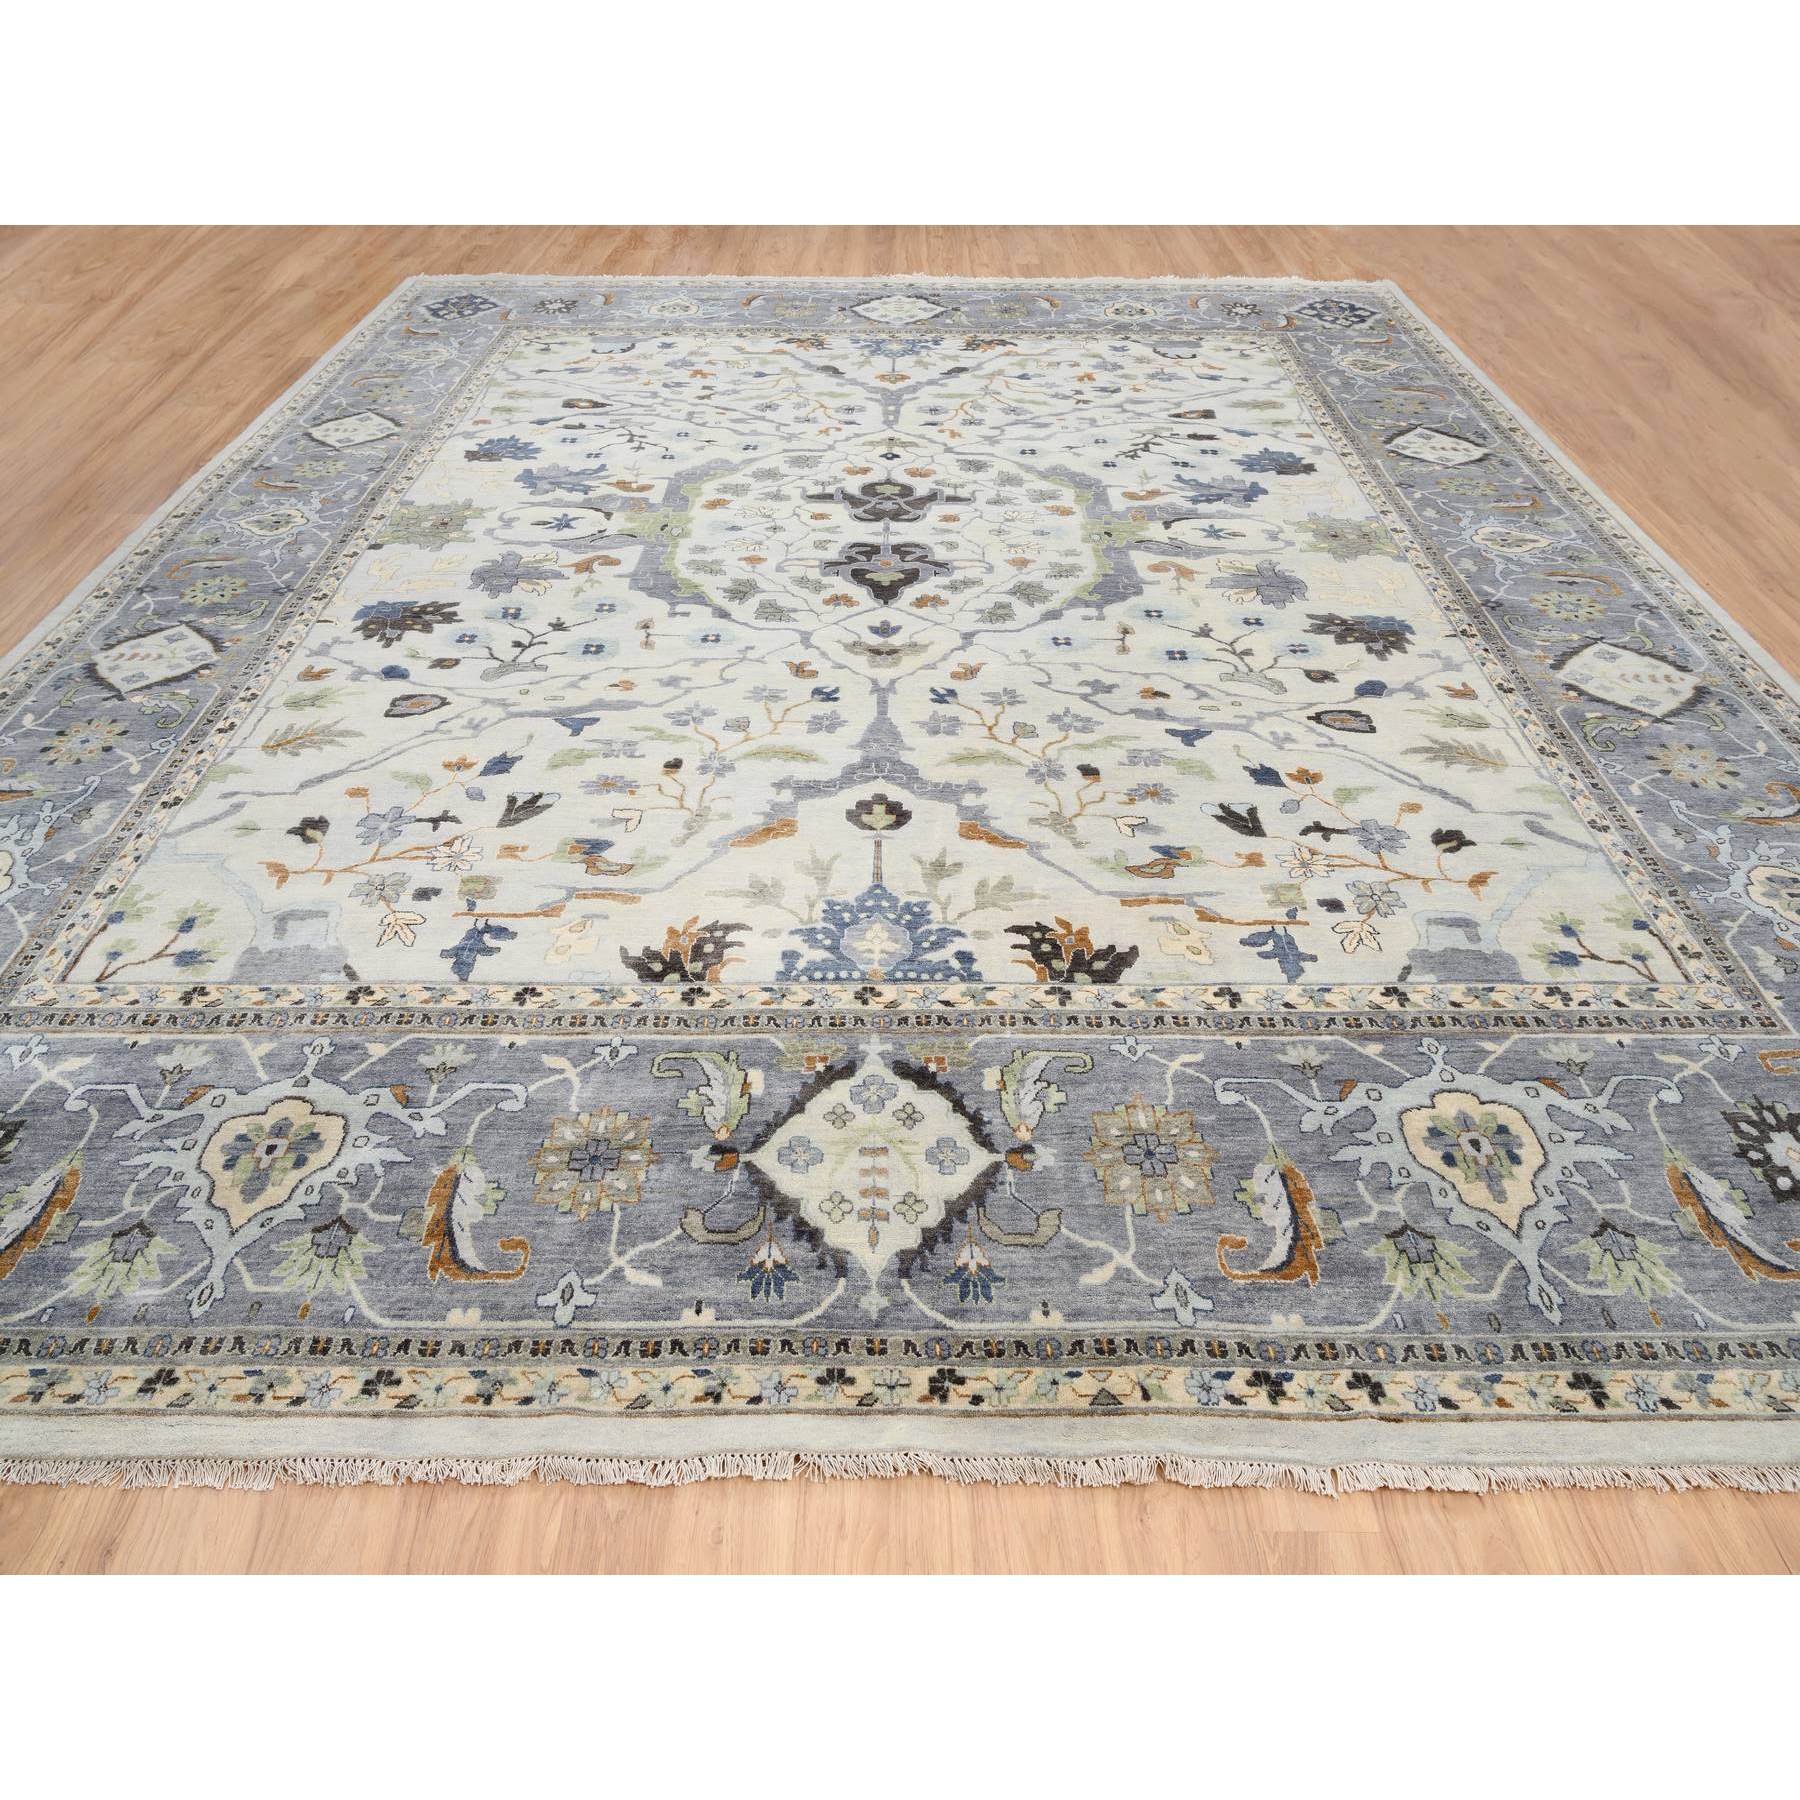 14'x15'9" Light Gray, Denser Weave Oushak with Floral Motifs, Pure Wool Hand Woven, Extra Wide, Oversized Oriental Rug 